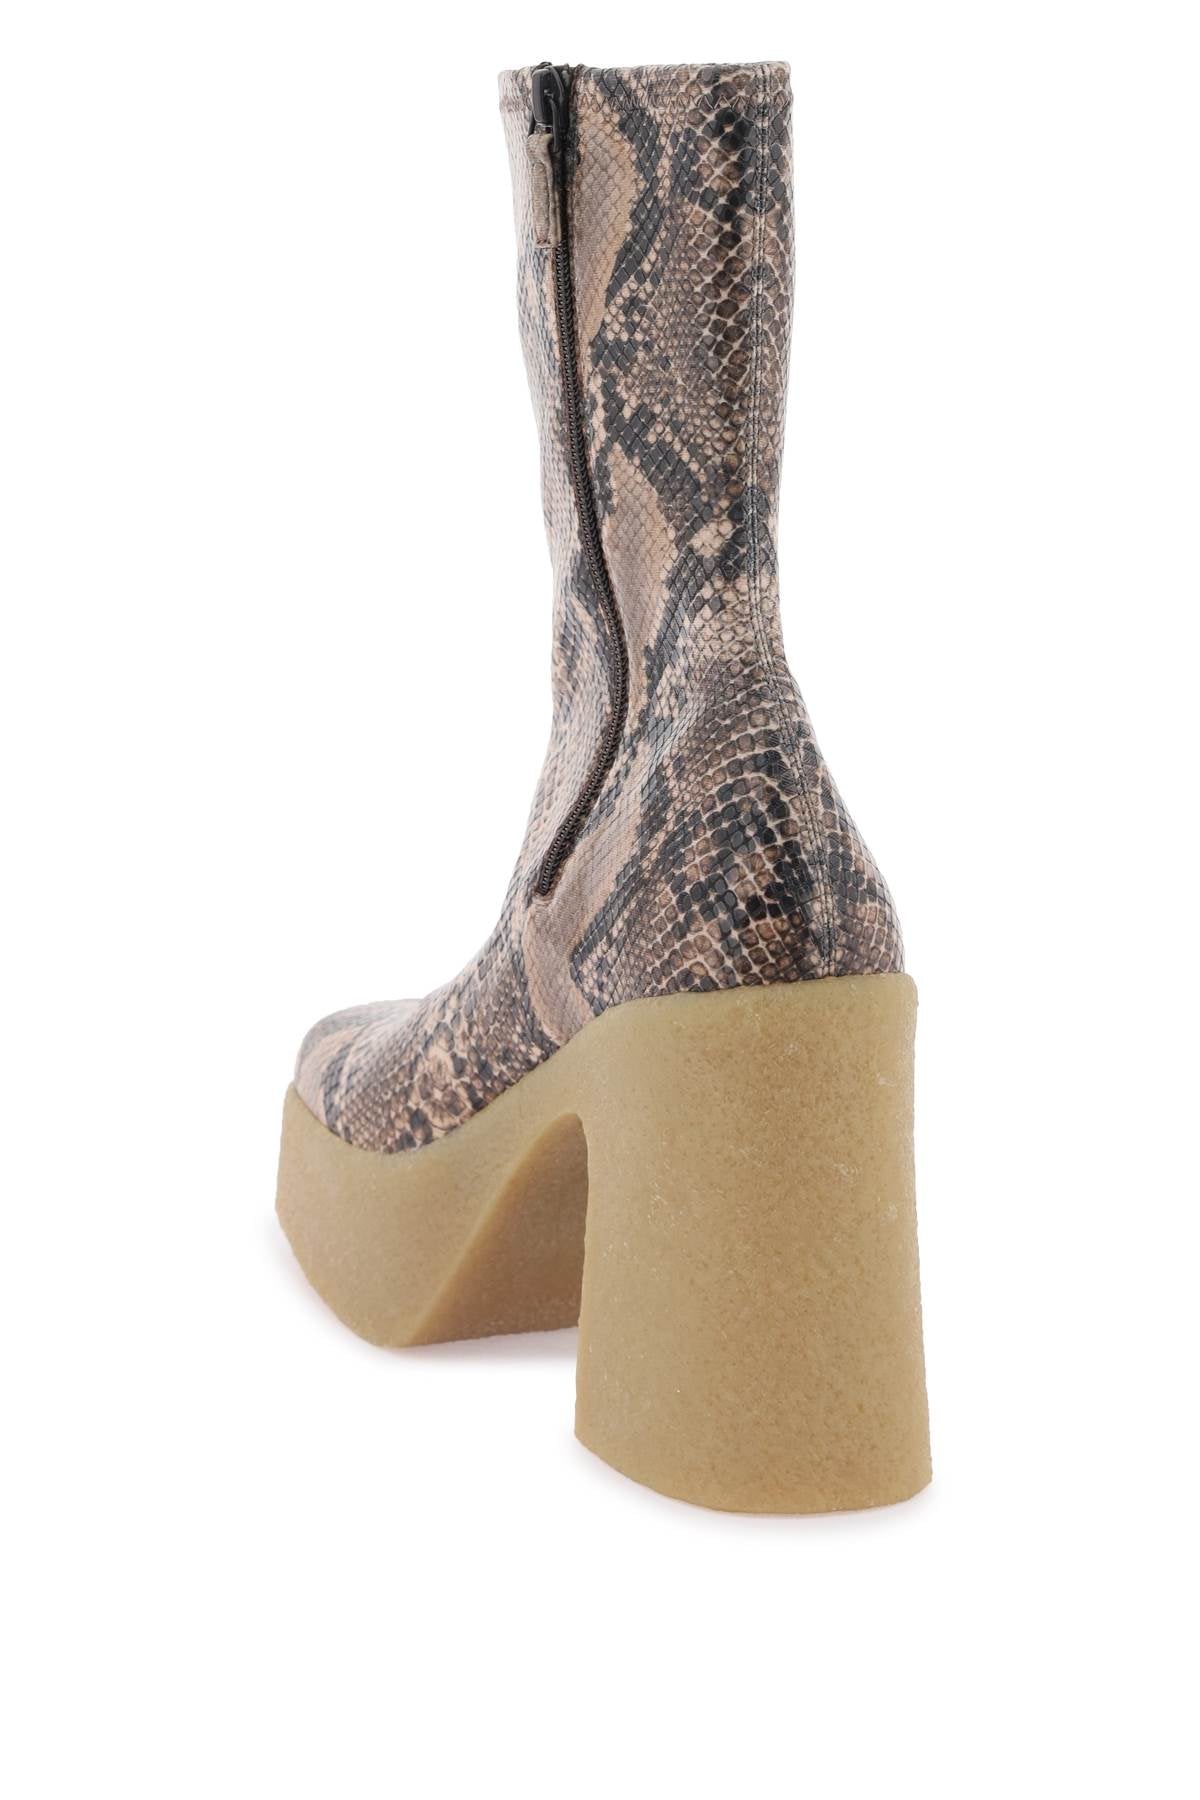 STELLA MCCARTNEY Mixed Colours Python Ankle Wedge Boots for Women